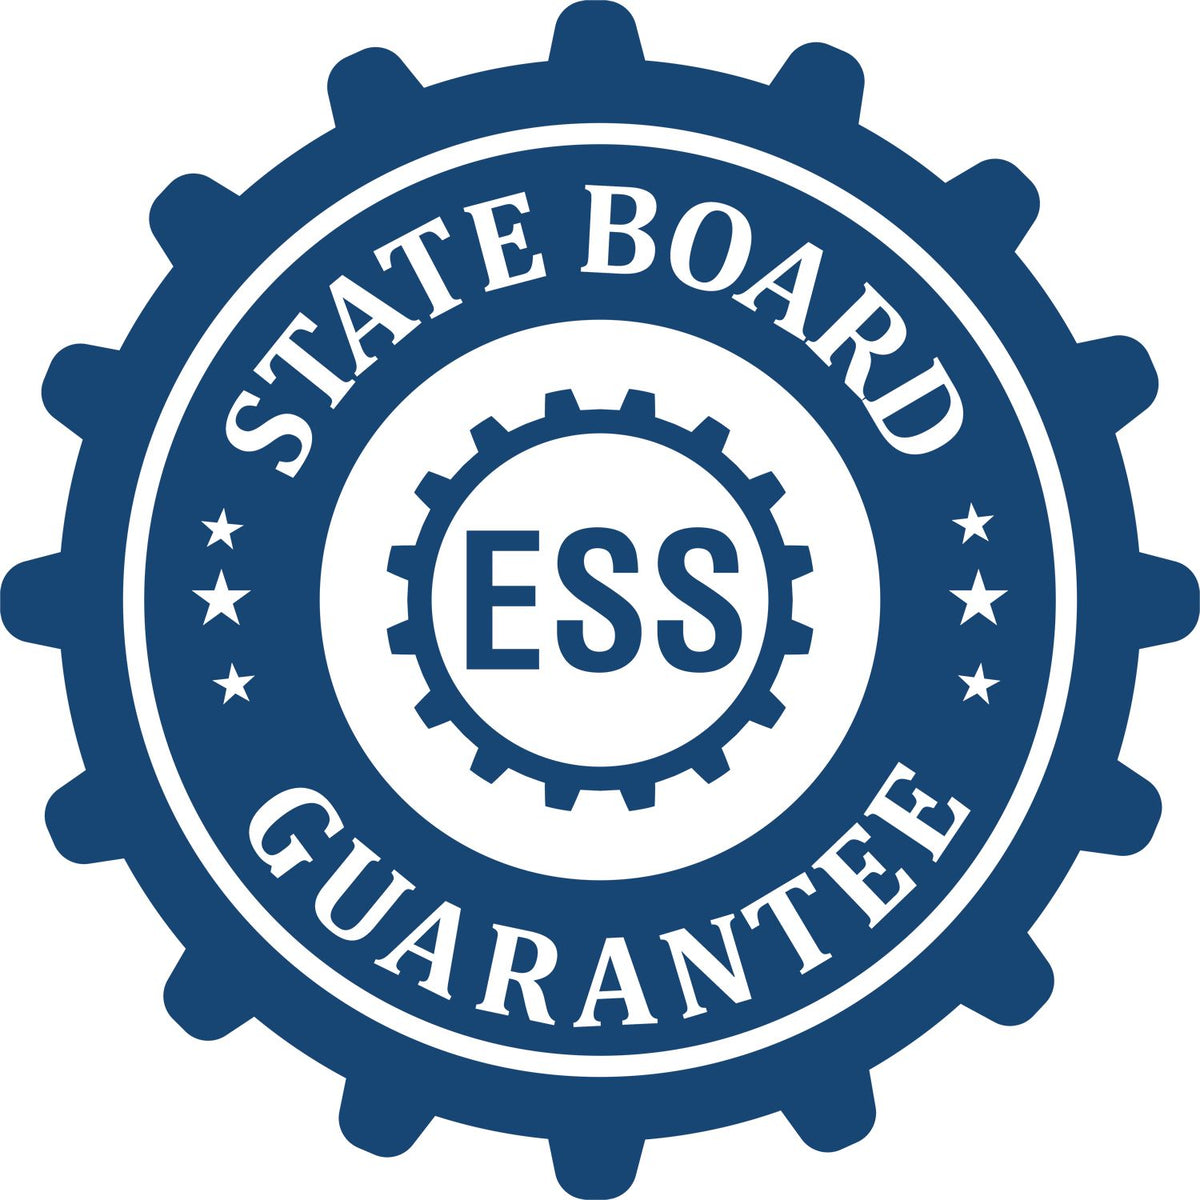 An emblem in a gear shape illustrating a state board guarantee for the Hybrid New Hampshire Geologist Seal